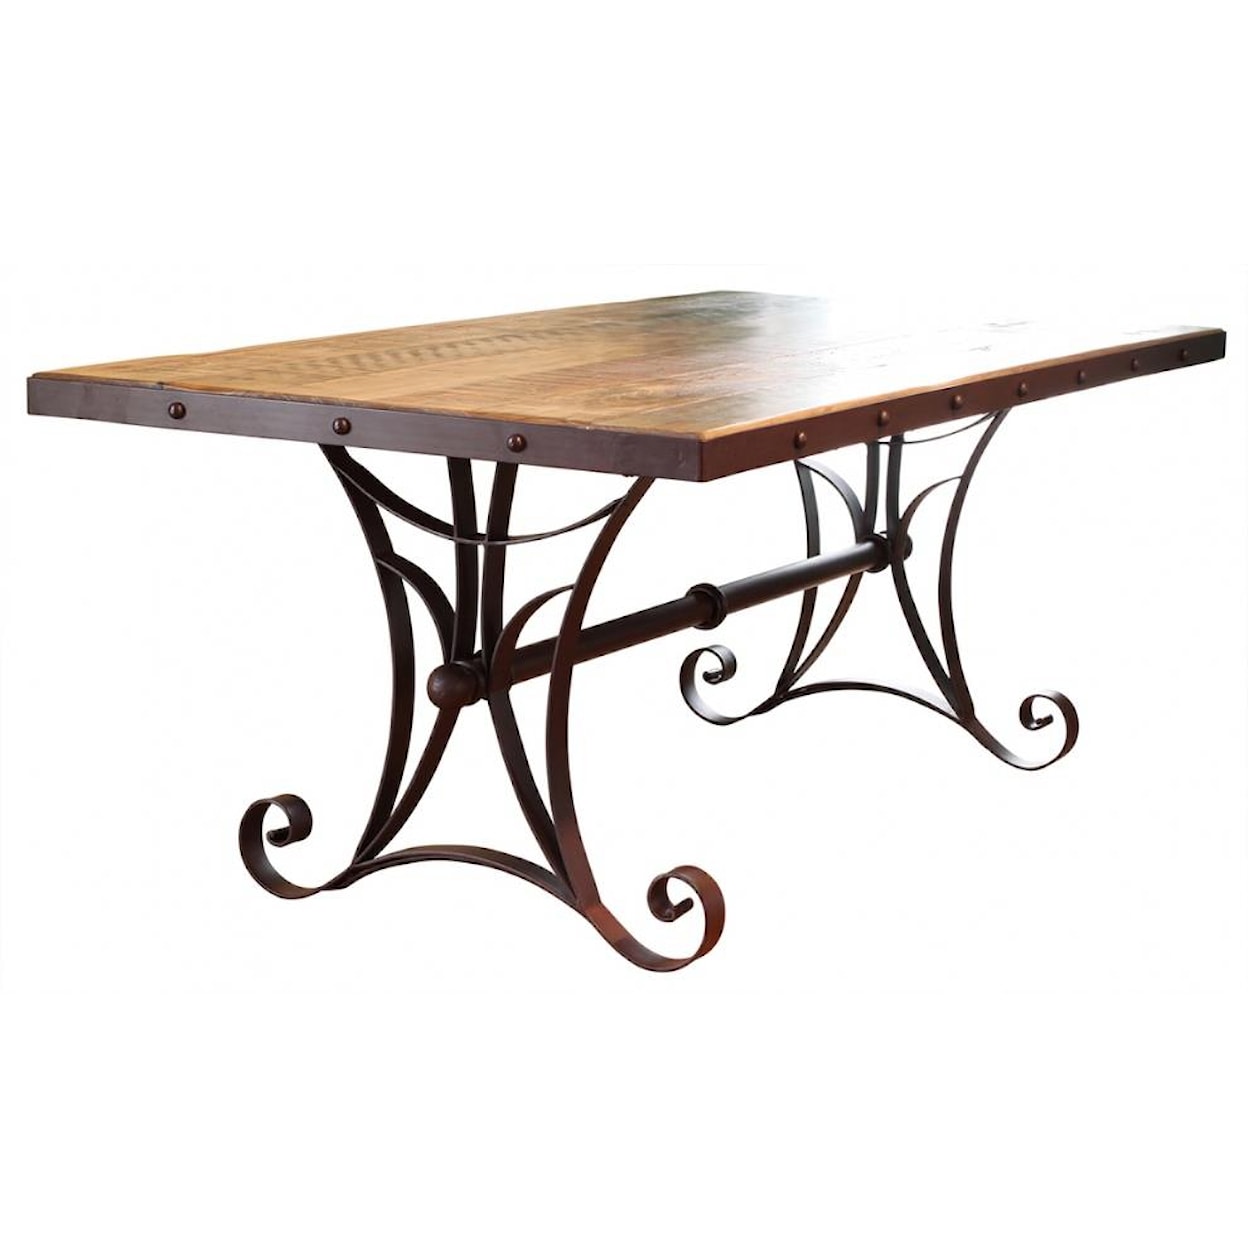 VFM Signature 900 Antique Dining Table with Metal Base